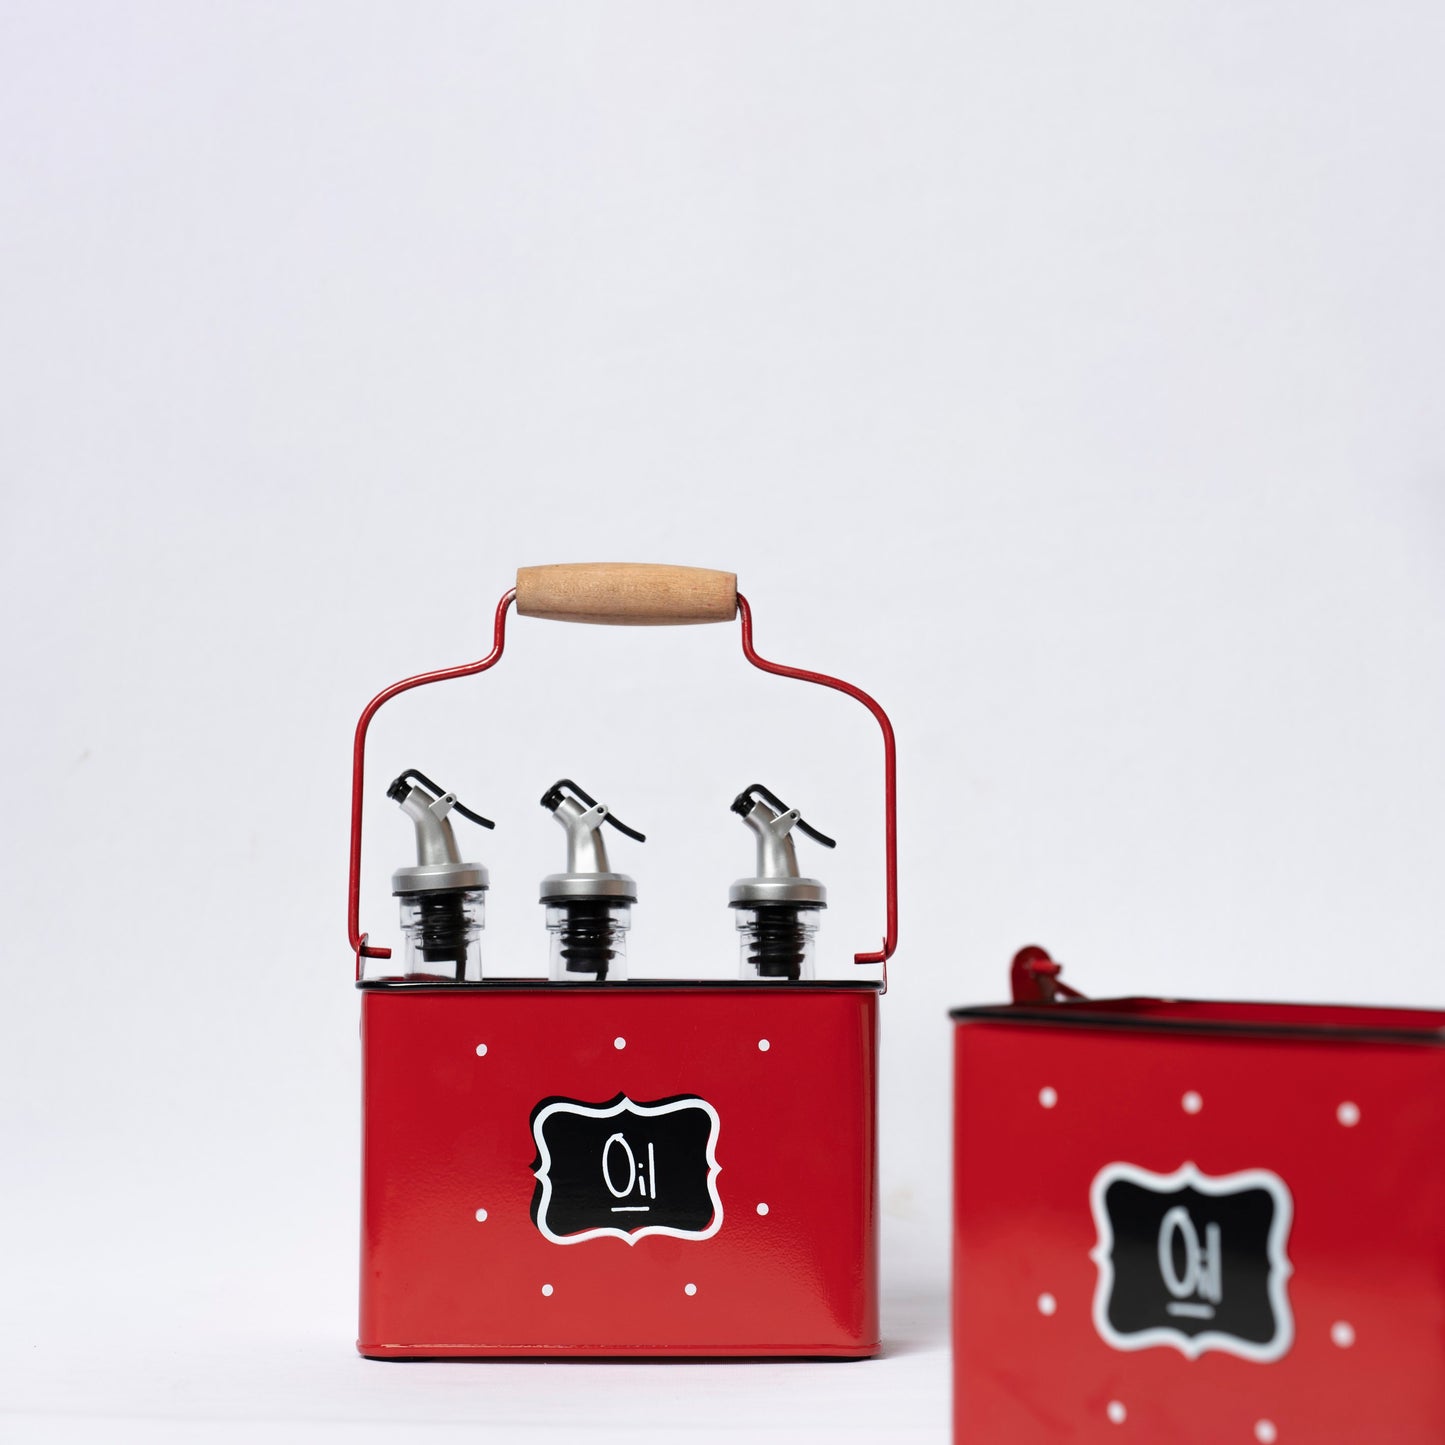 Polka Dot Steel Oil Caddy (Red) - OCST0001 - View 8